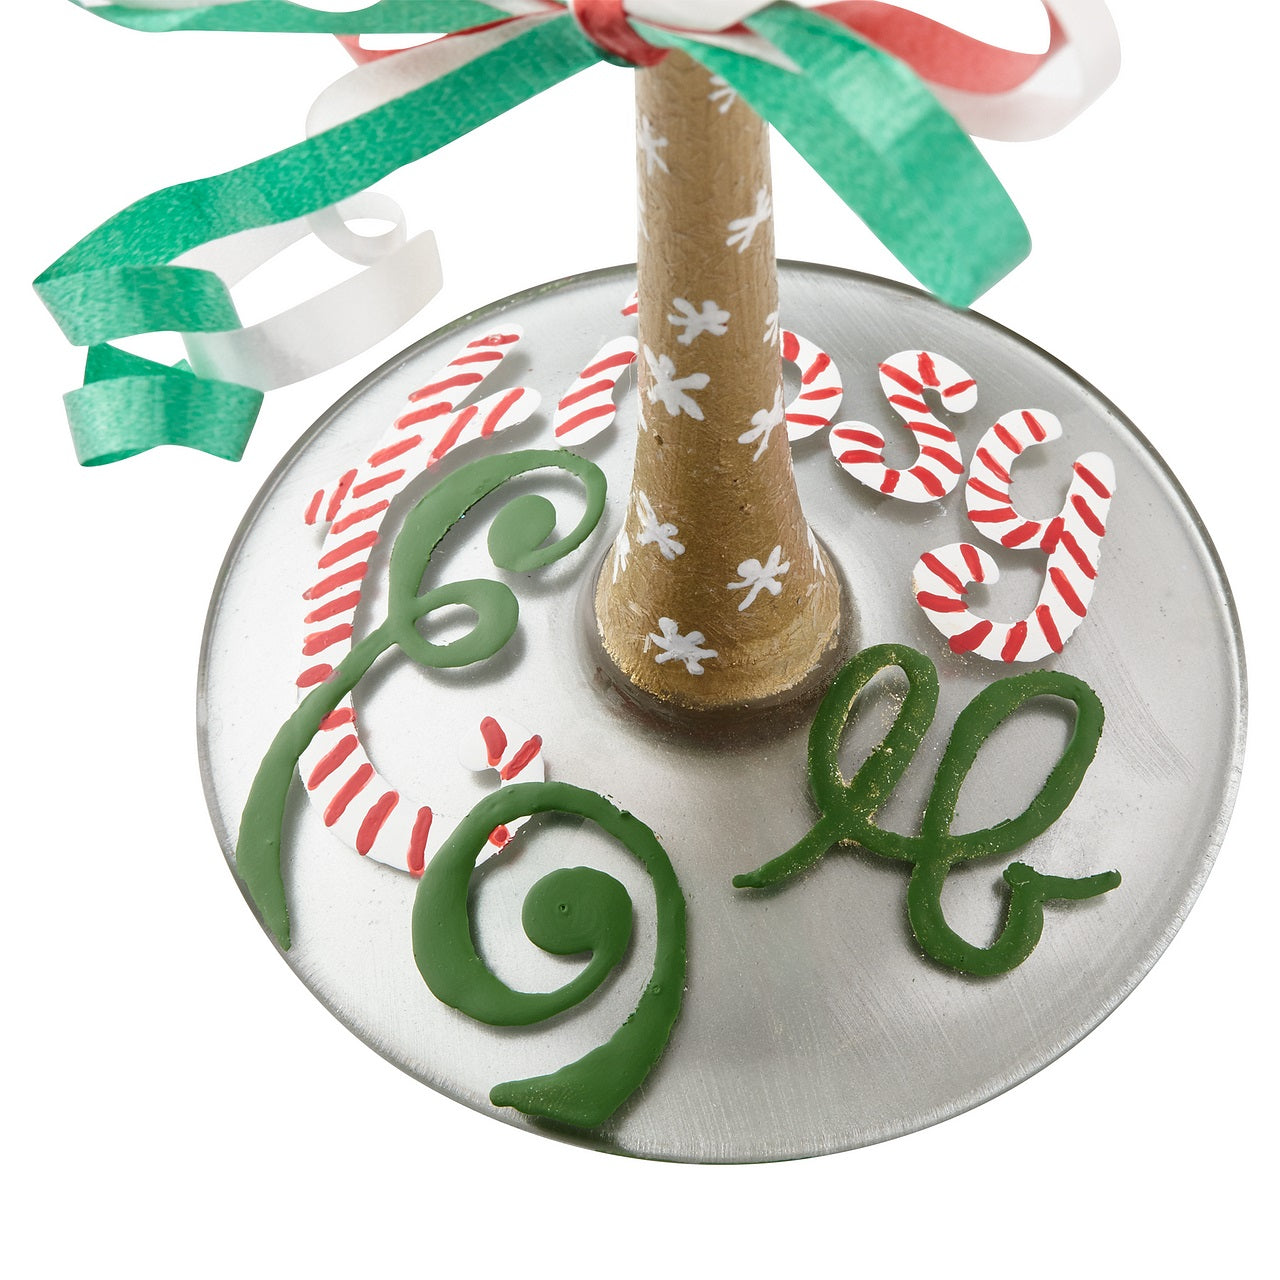 Tipsy Elf Wine Glass  Gleeful and gulping, the little elves decking this glass are sure to delight and intoxicate your holiday. Arrives in a beautiful gift box with signature recipe. Artisan blown glass. Hand wash only.